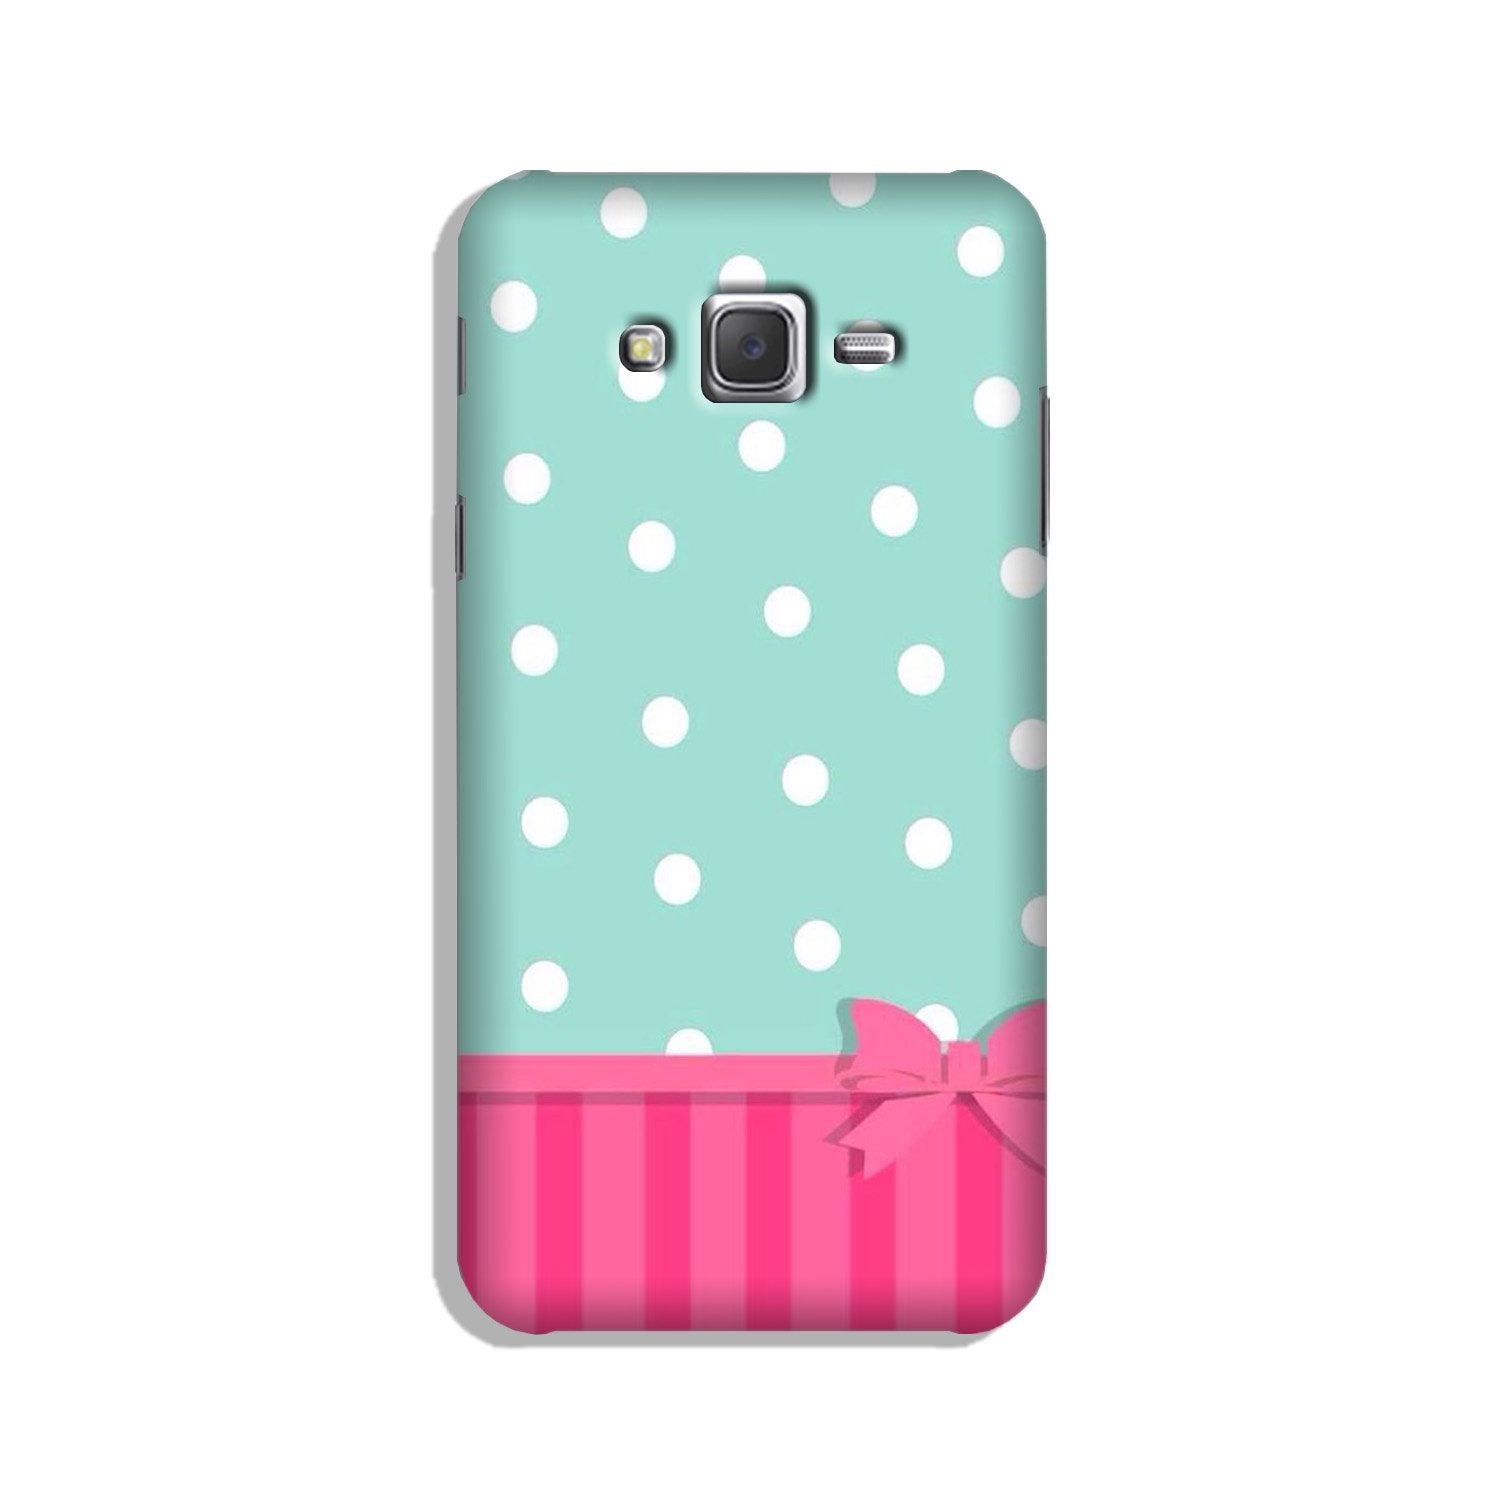 Gift Wrap Case for Galaxy J5 (2015)